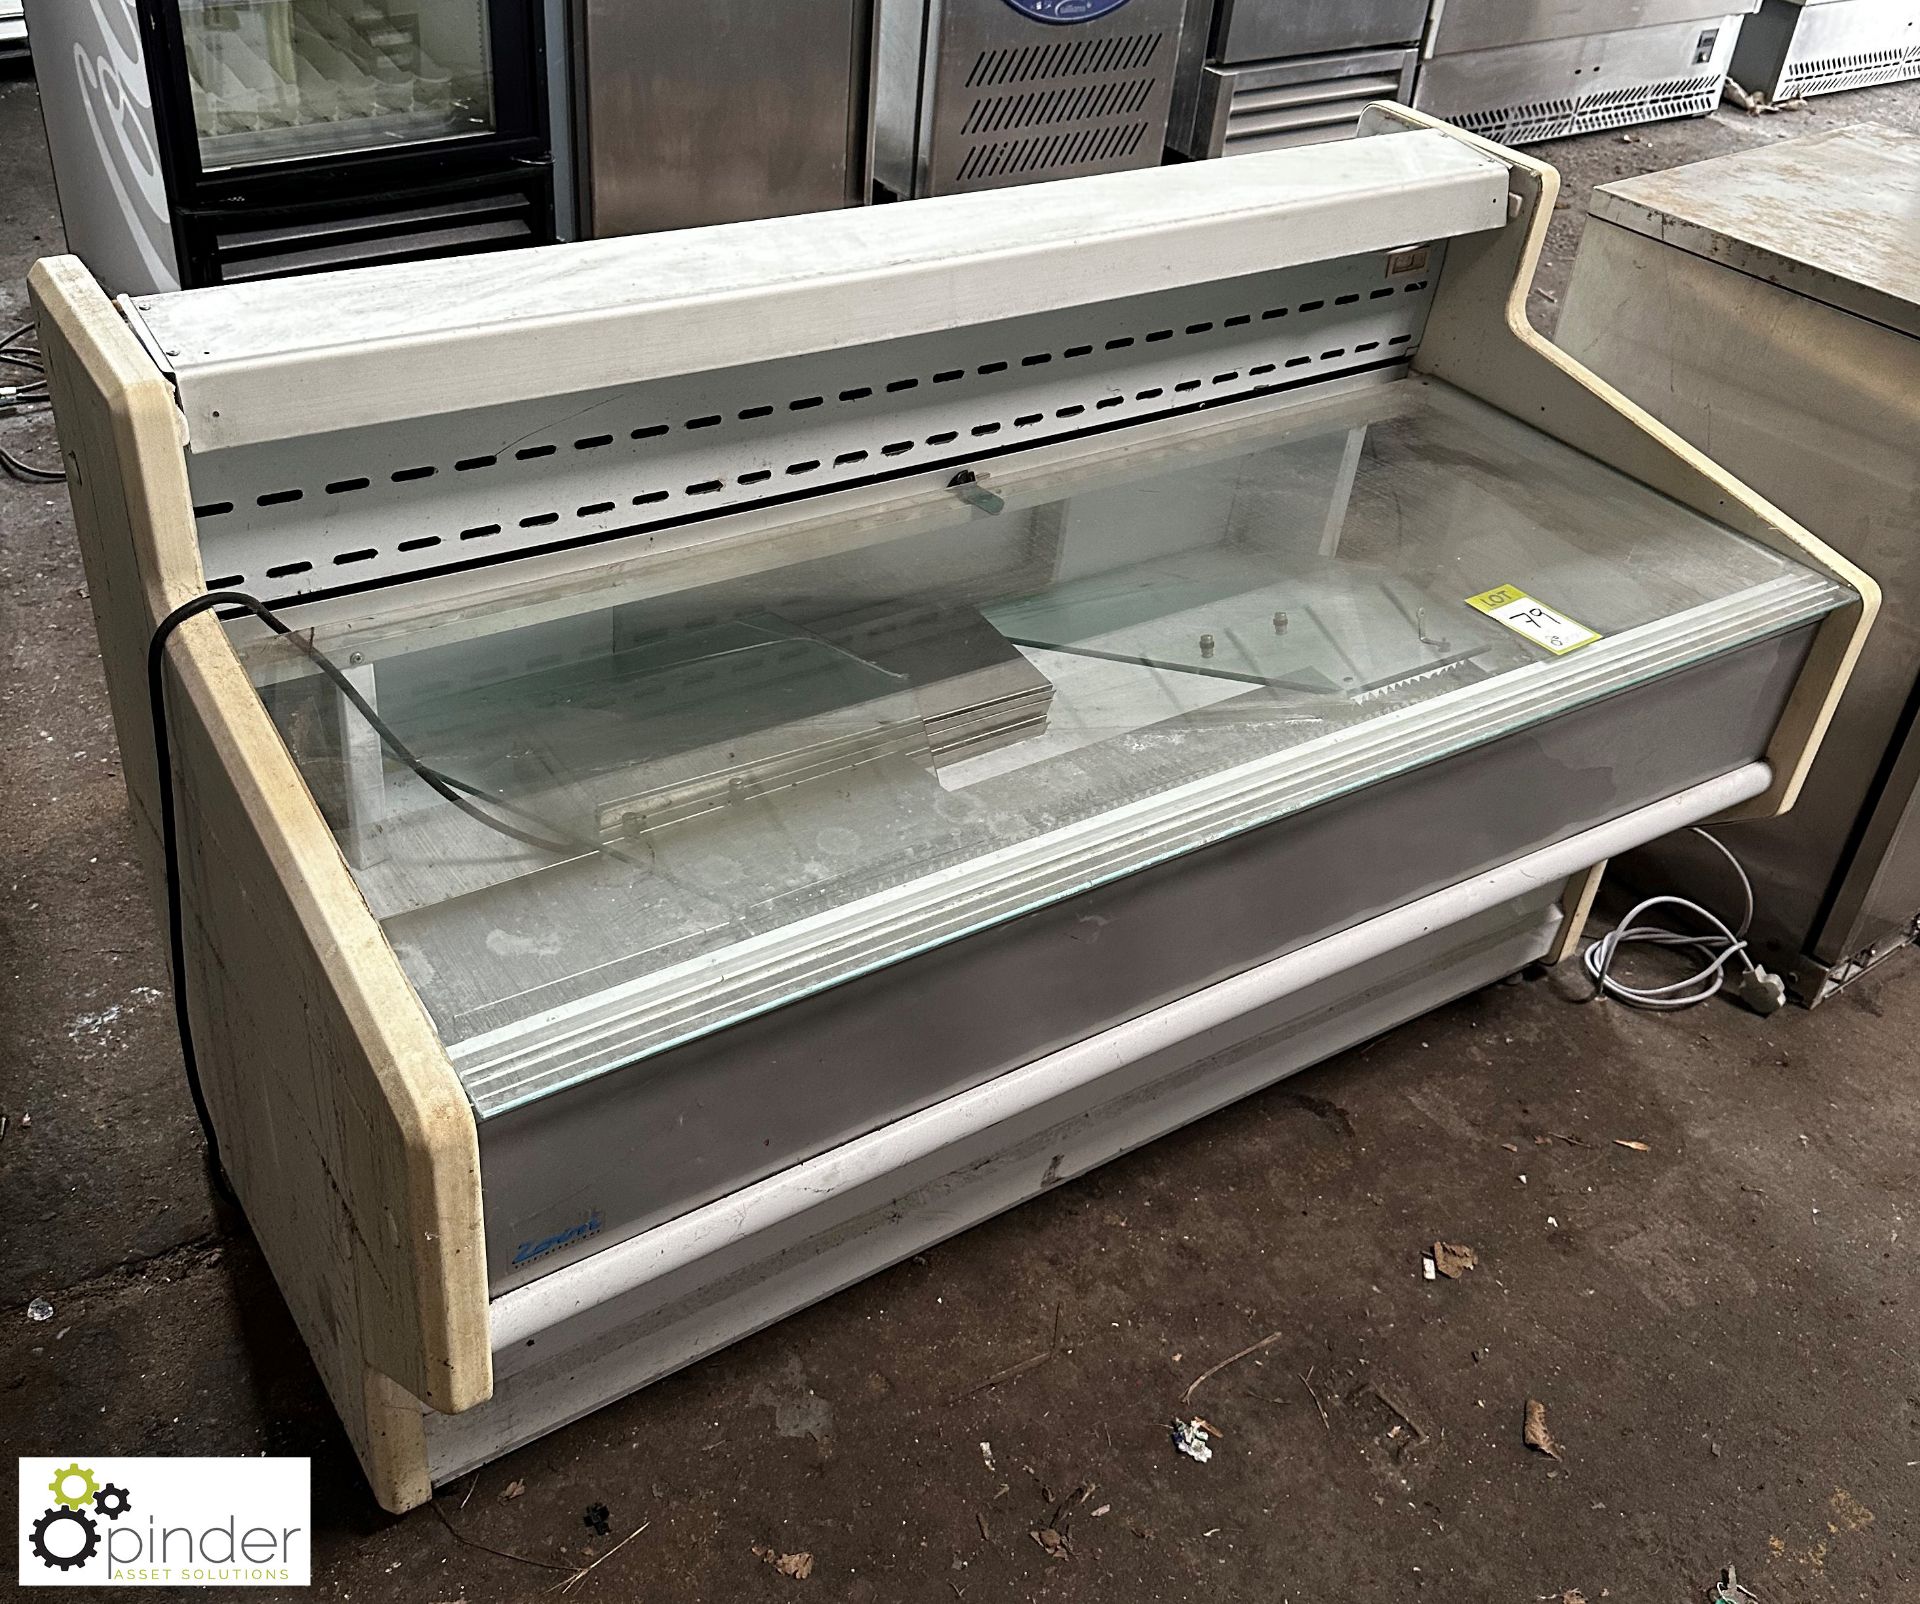 Zoin HILL150 Display Fridge Counter, 1500mm x 760mm x 920mm - Image 2 of 3